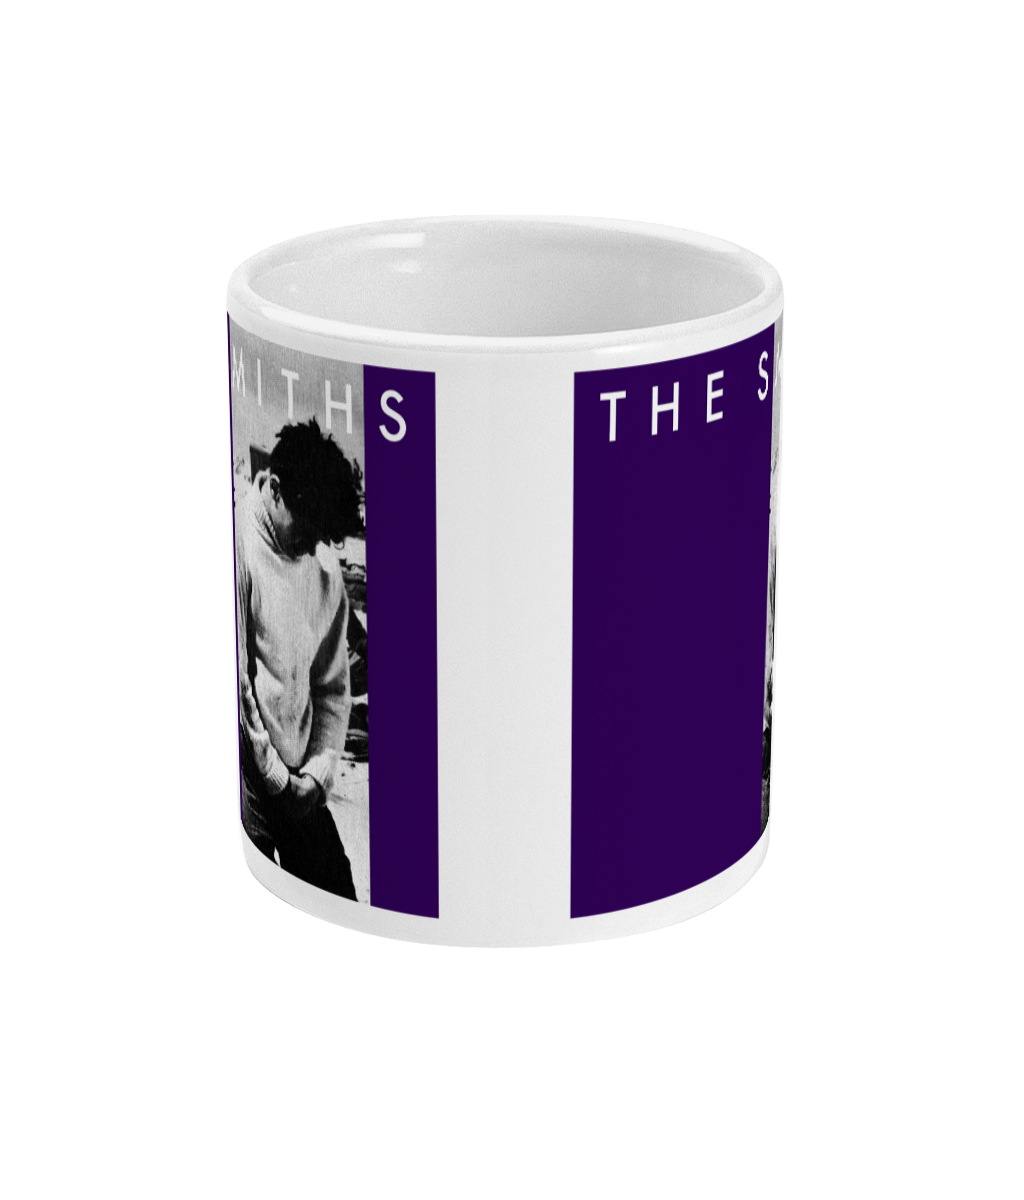 THE SMITHS - How Soon Is Now? - 12" - 1985 - Mug